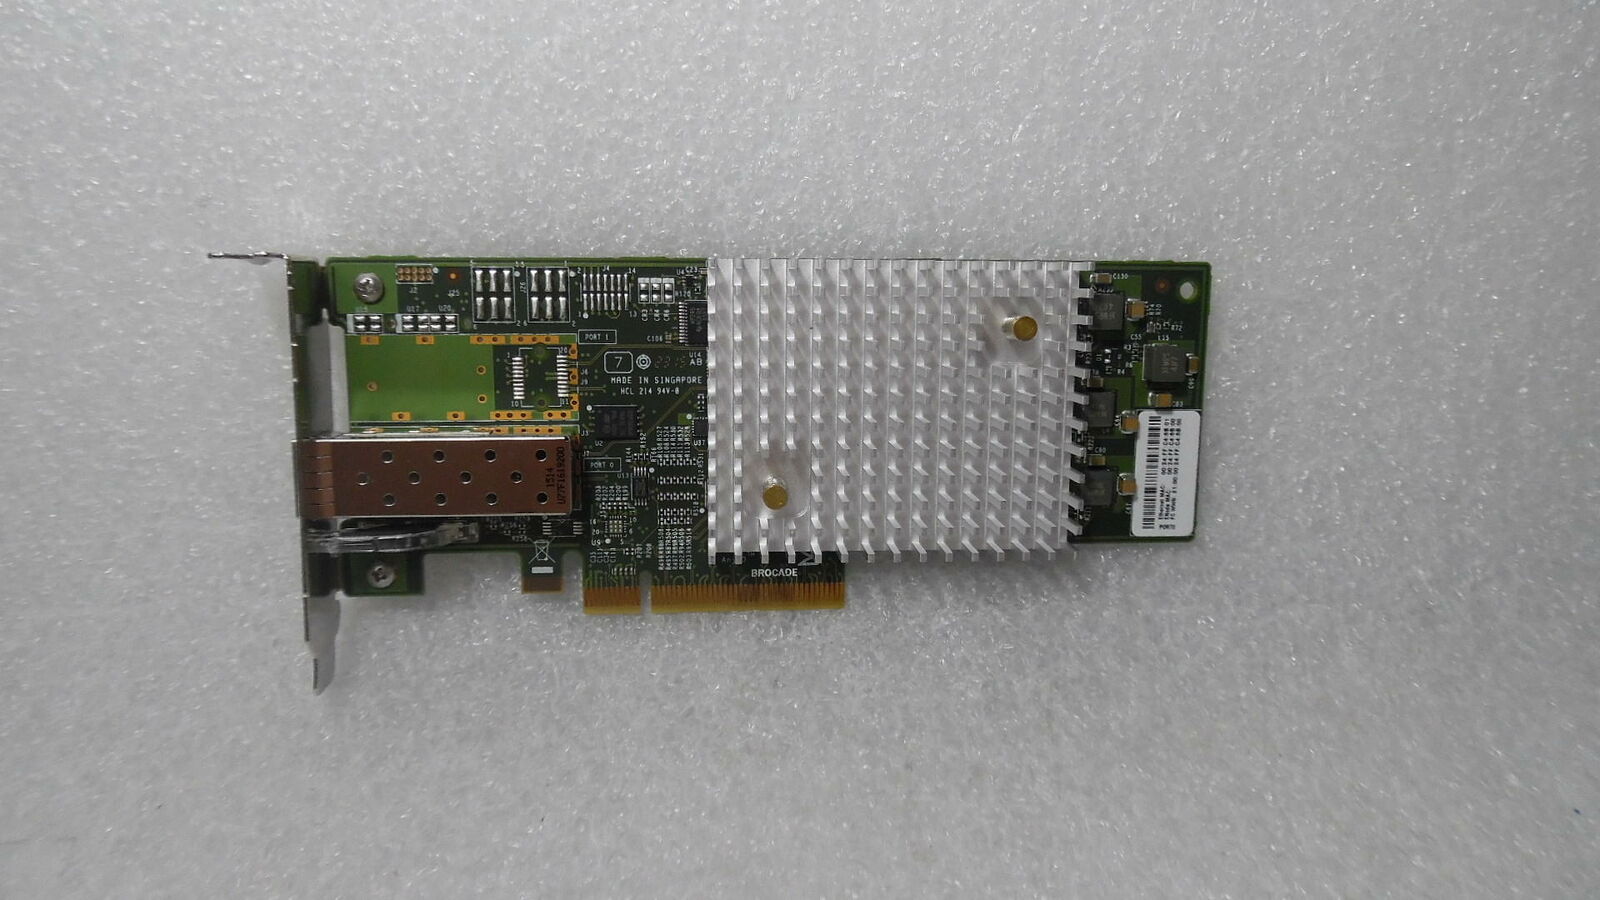 Brocade BR-1860-1F00 Single Port 16GB FC PCIE Low Profile Network Adapter Card